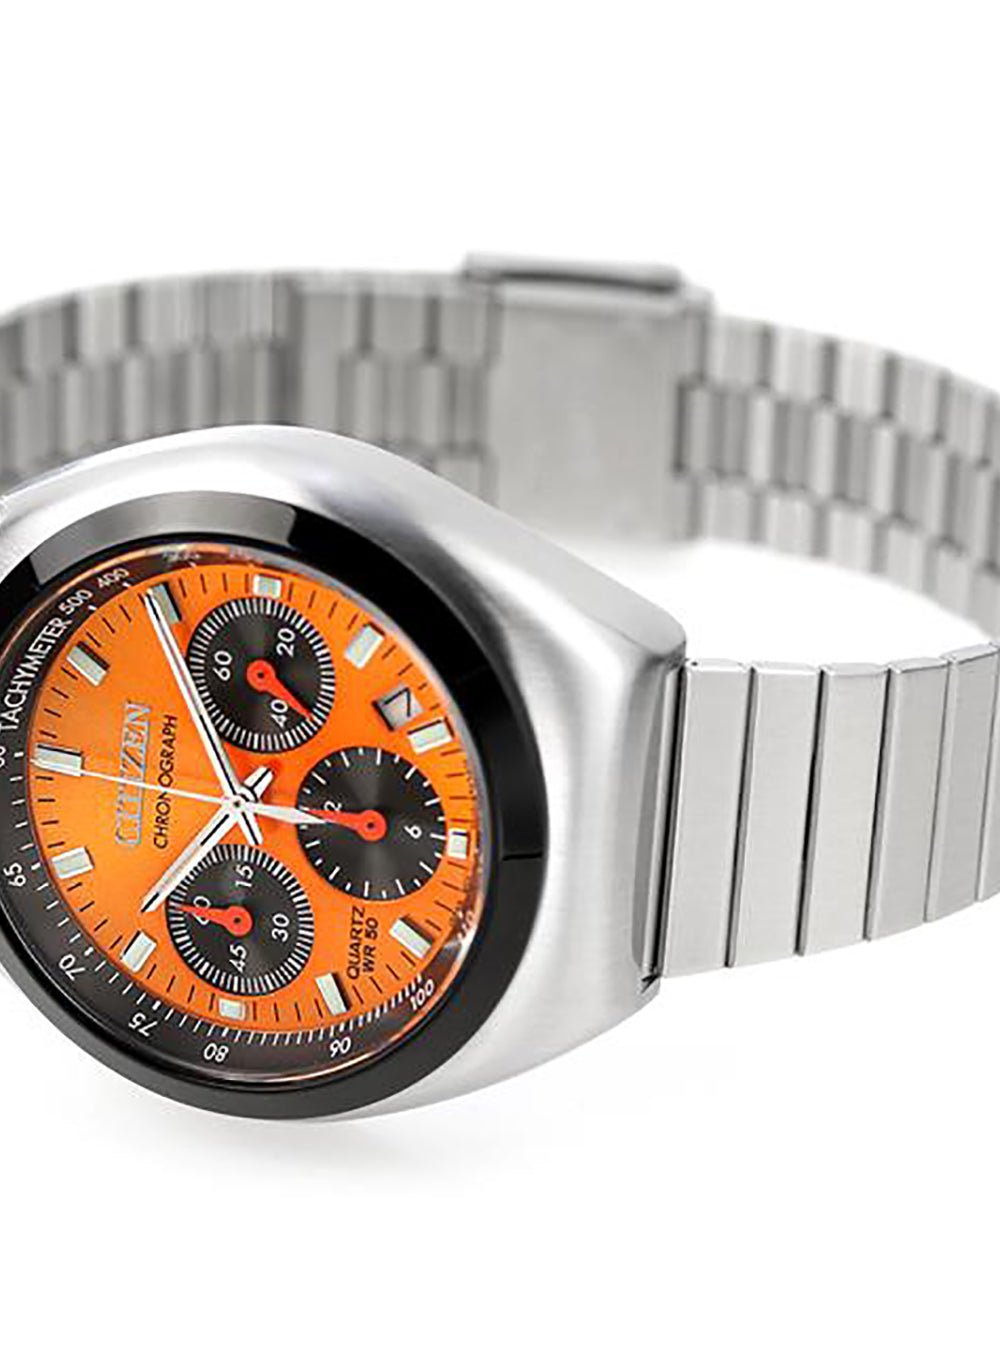 CITIZEN COLLECTION WATCH RECORD LABEL TSUNO(BULLHEAD) CHRONO AN3660-81X  LIMITED EDITION JAPAN MOV'T JDM